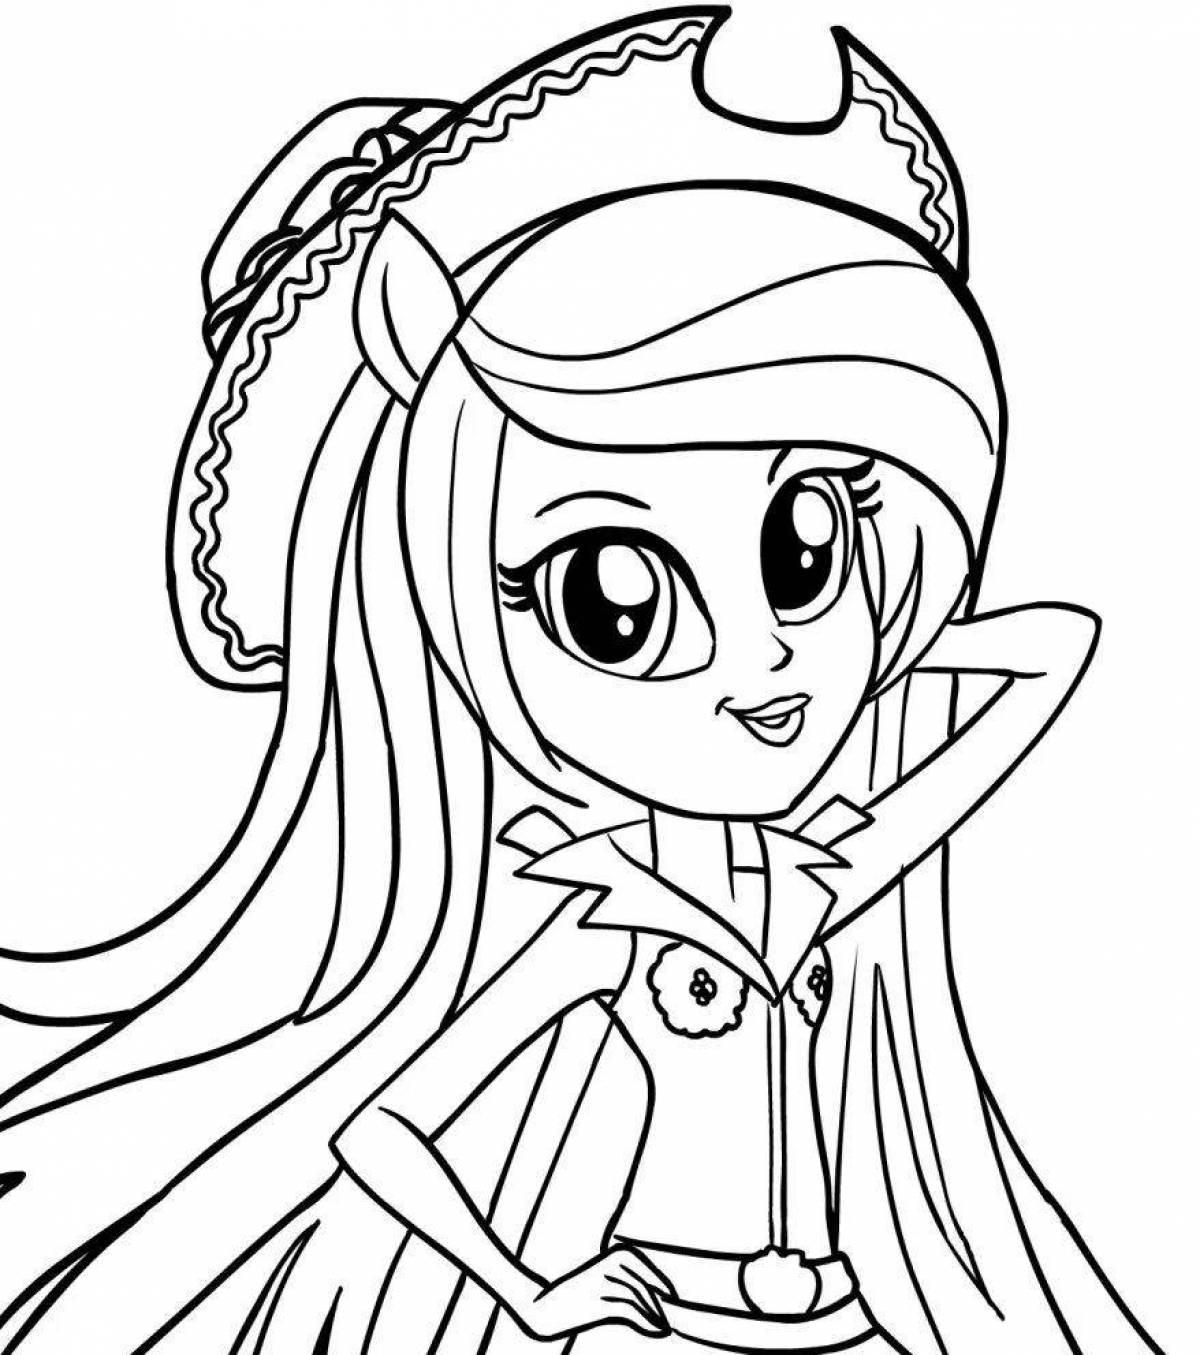 Gorgeous pony man coloring book